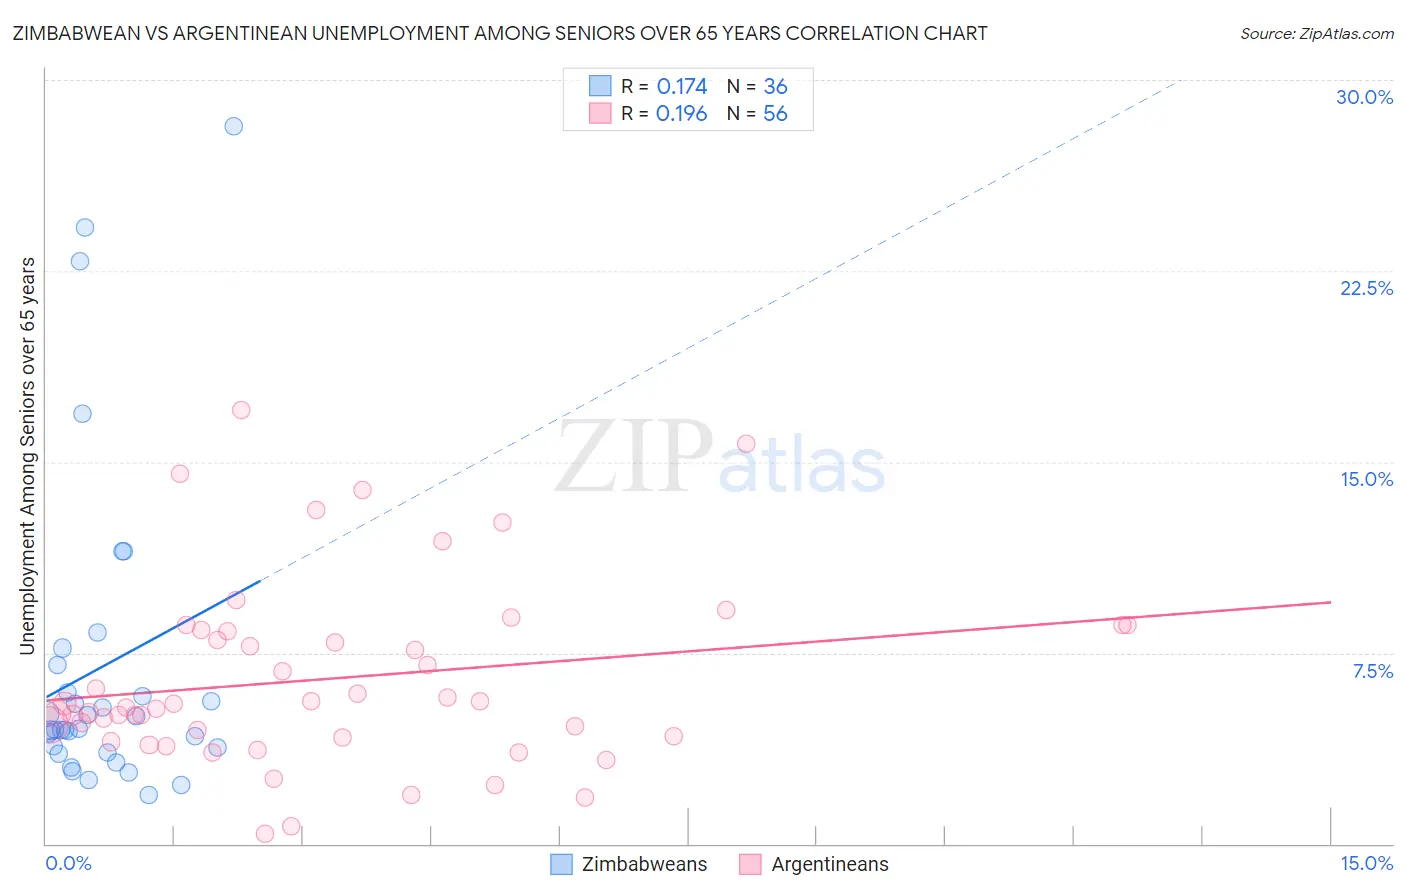 Zimbabwean vs Argentinean Unemployment Among Seniors over 65 years